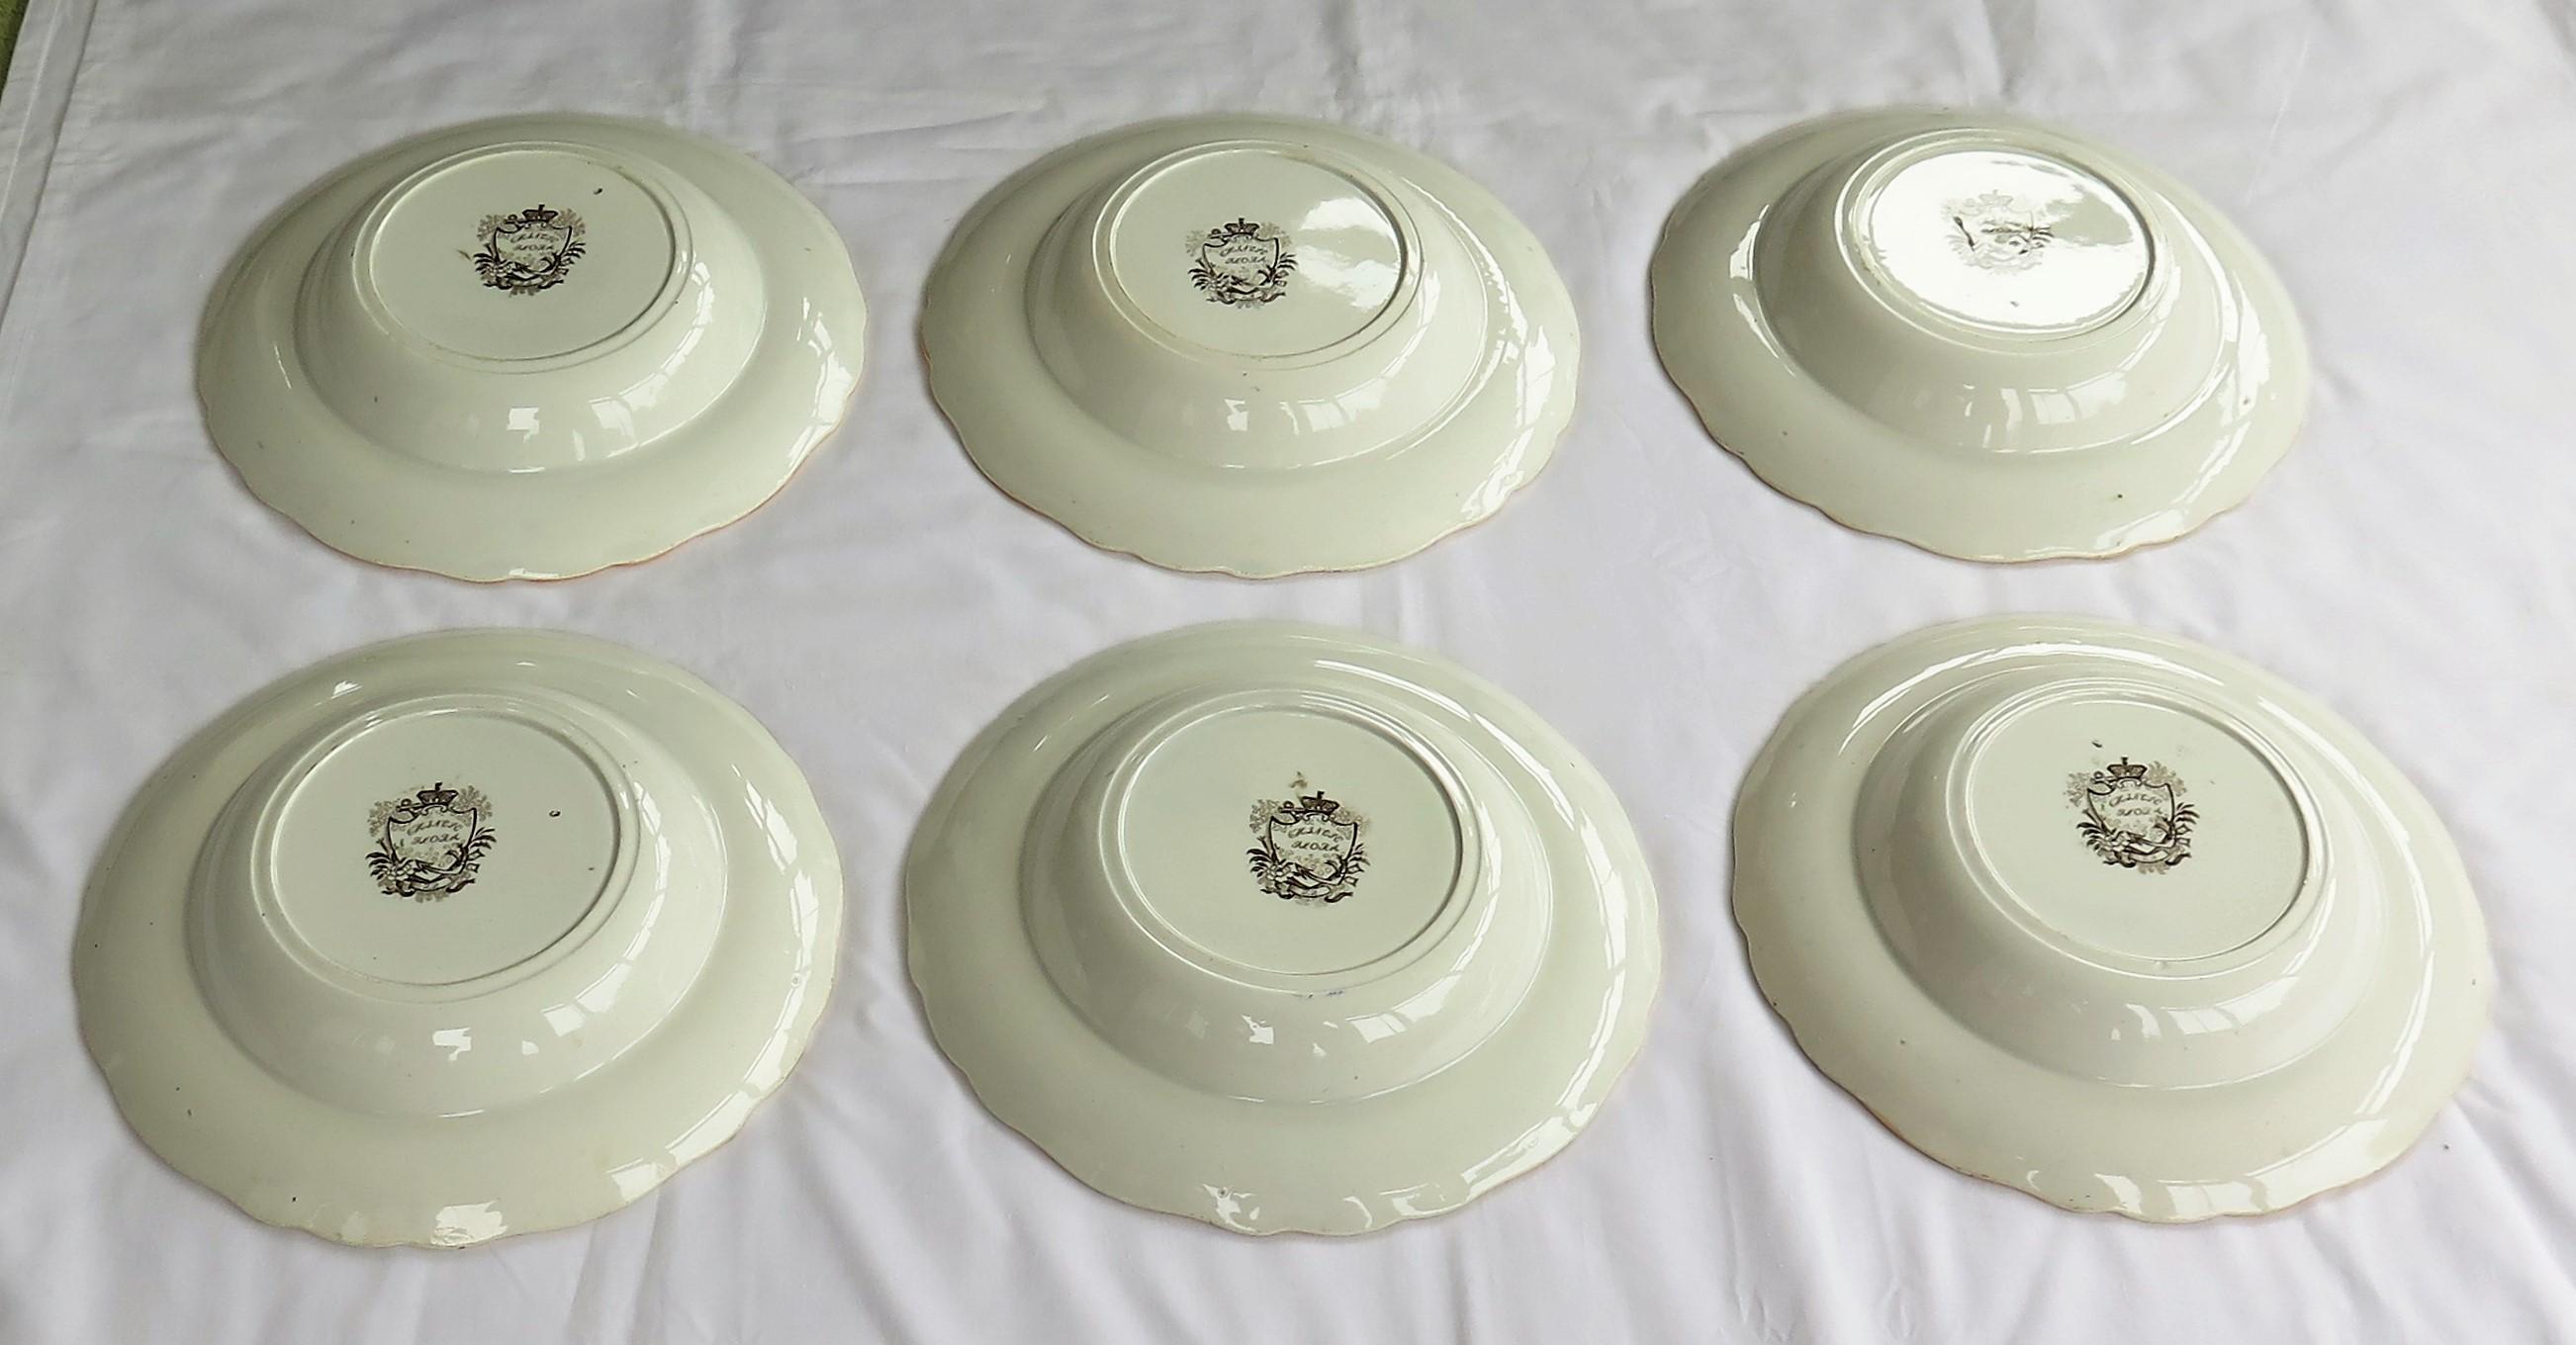 SIX Pottery Soup Bowls or Plates by Zachariah Boyle Chinese Flora Pattern 4